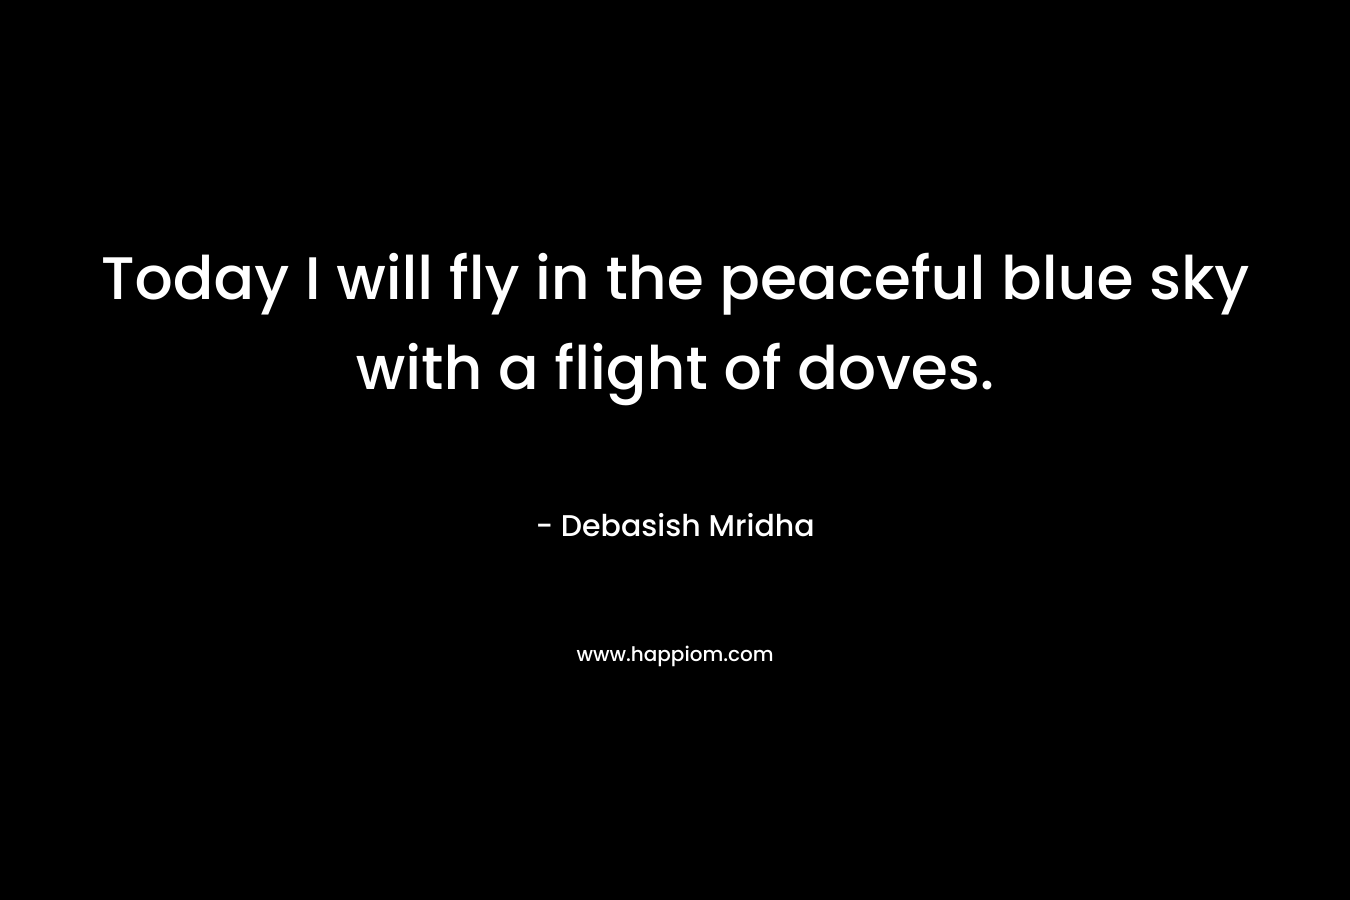 Today I will fly in the peaceful blue sky with a flight of doves. – Debasish Mridha